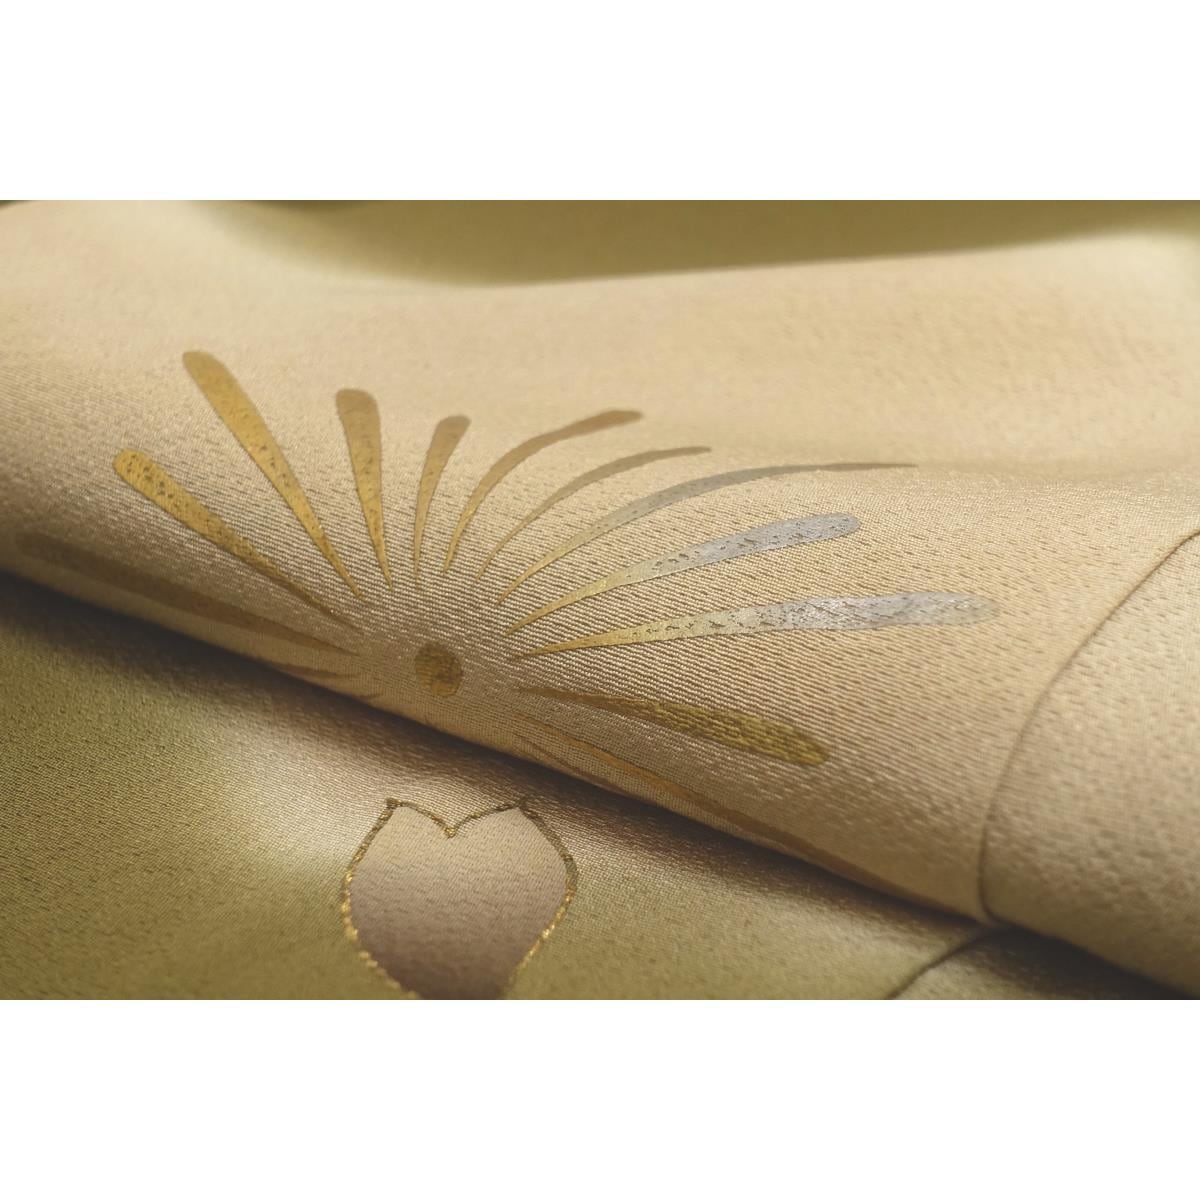 Homongi, gold-colored processing, blur dyeing